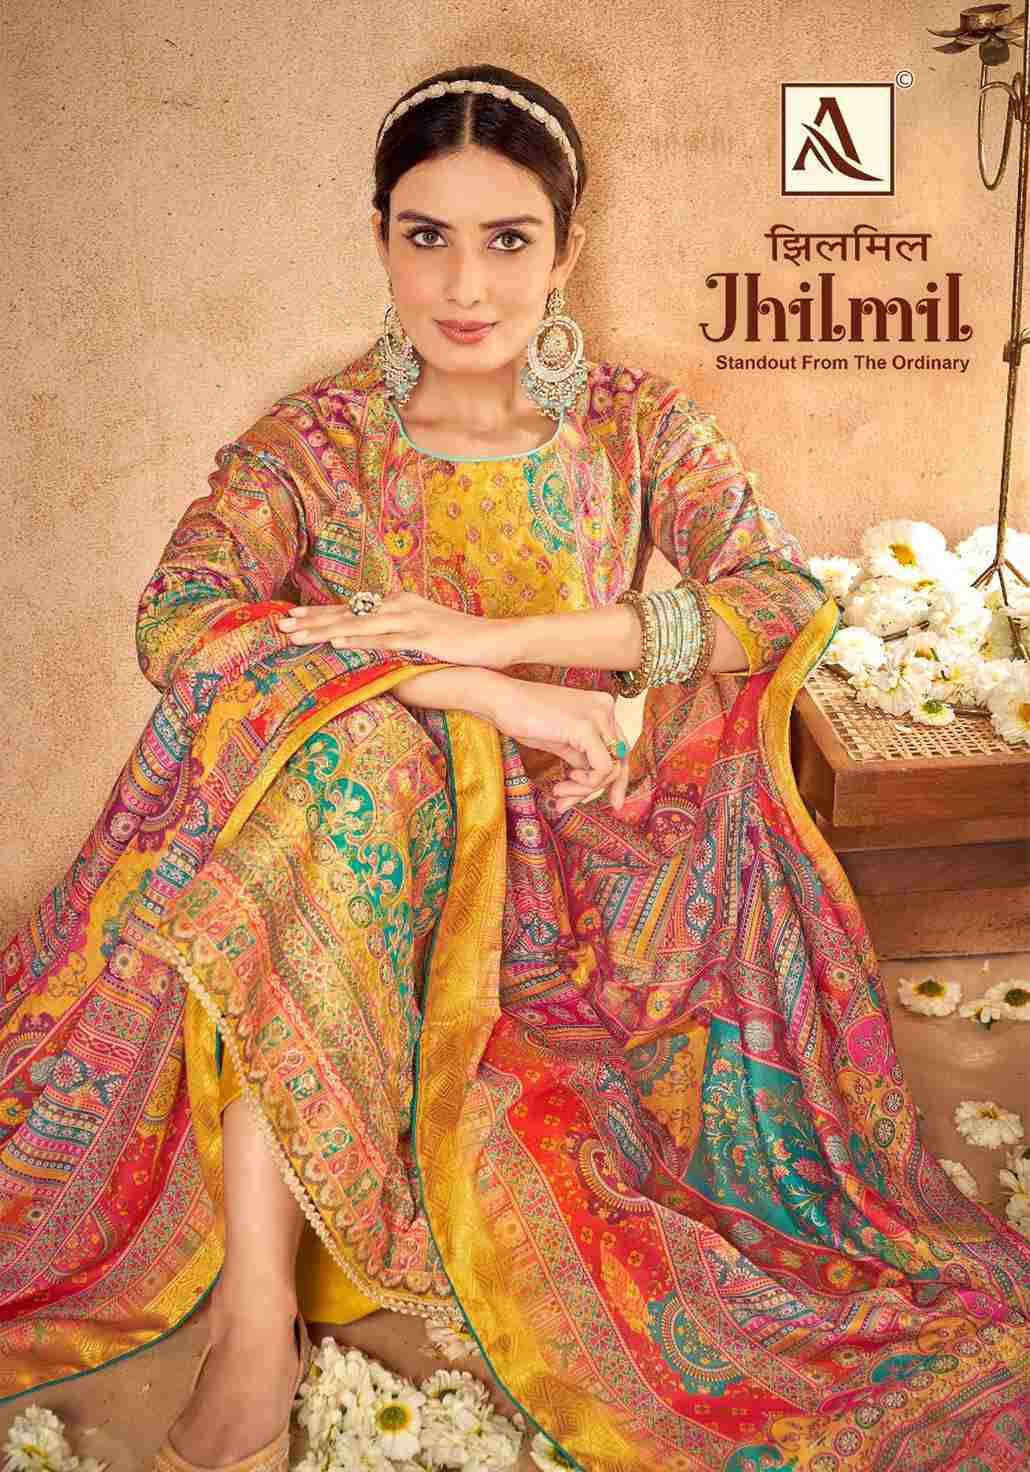 Jhilmil By Alok Suit 1474-001 To 1474-006 Series Beautiful Festive Suits Colorful Stylish Fancy Casual Wear & Ethnic Wear Pure Muslin Jacquard Dresses At Wholesale Price